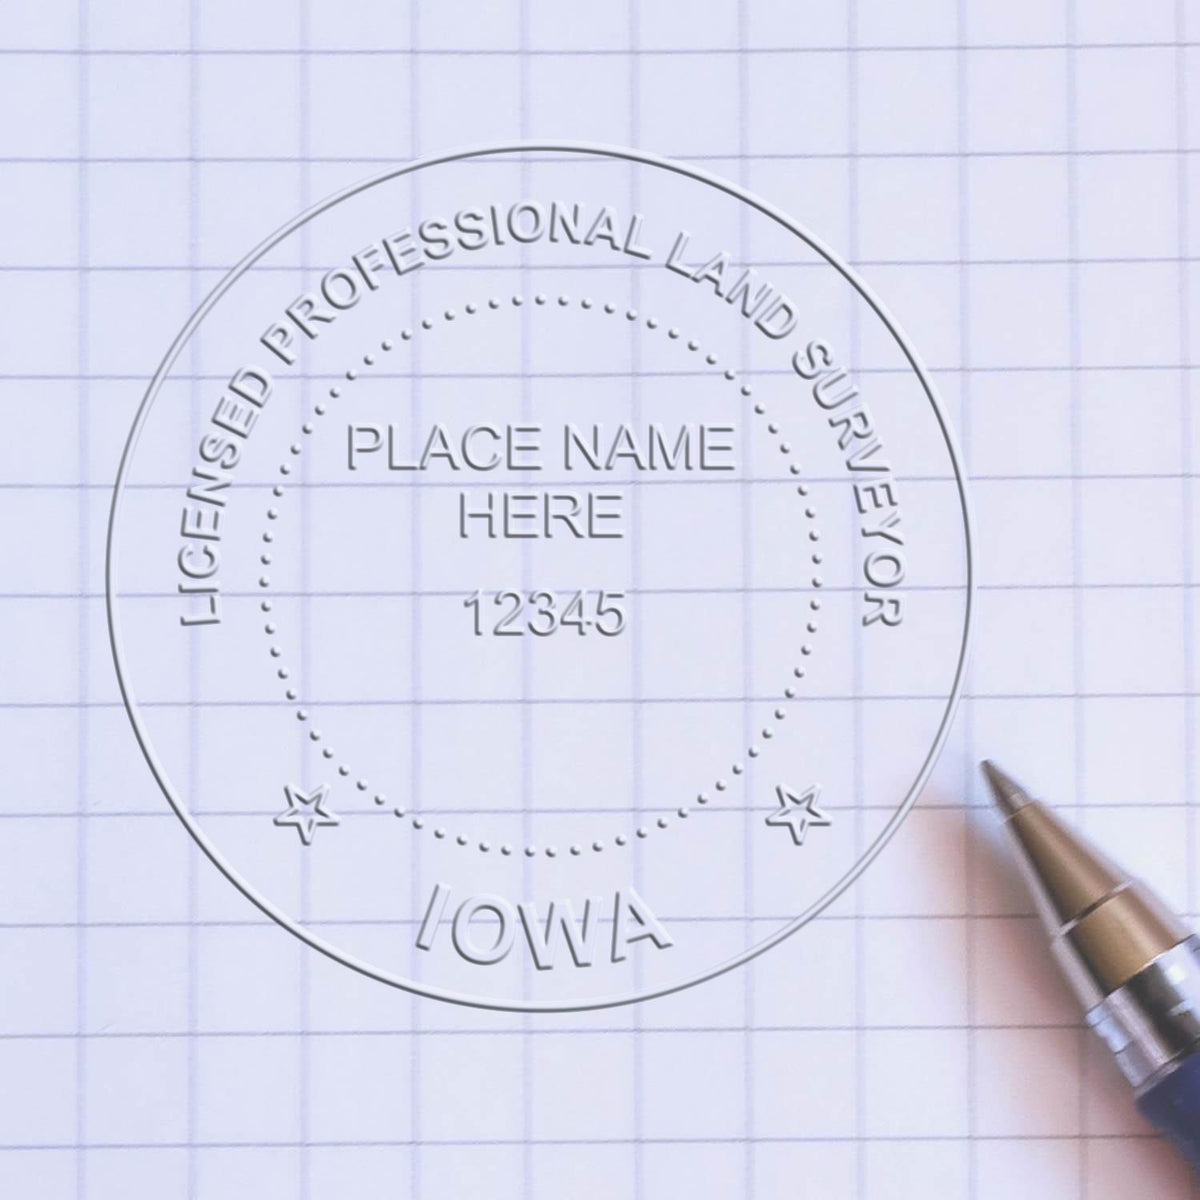 A stamped impression of the Handheld Iowa Land Surveyor Seal in this stylish lifestyle photo, setting the tone for a unique and personalized product.